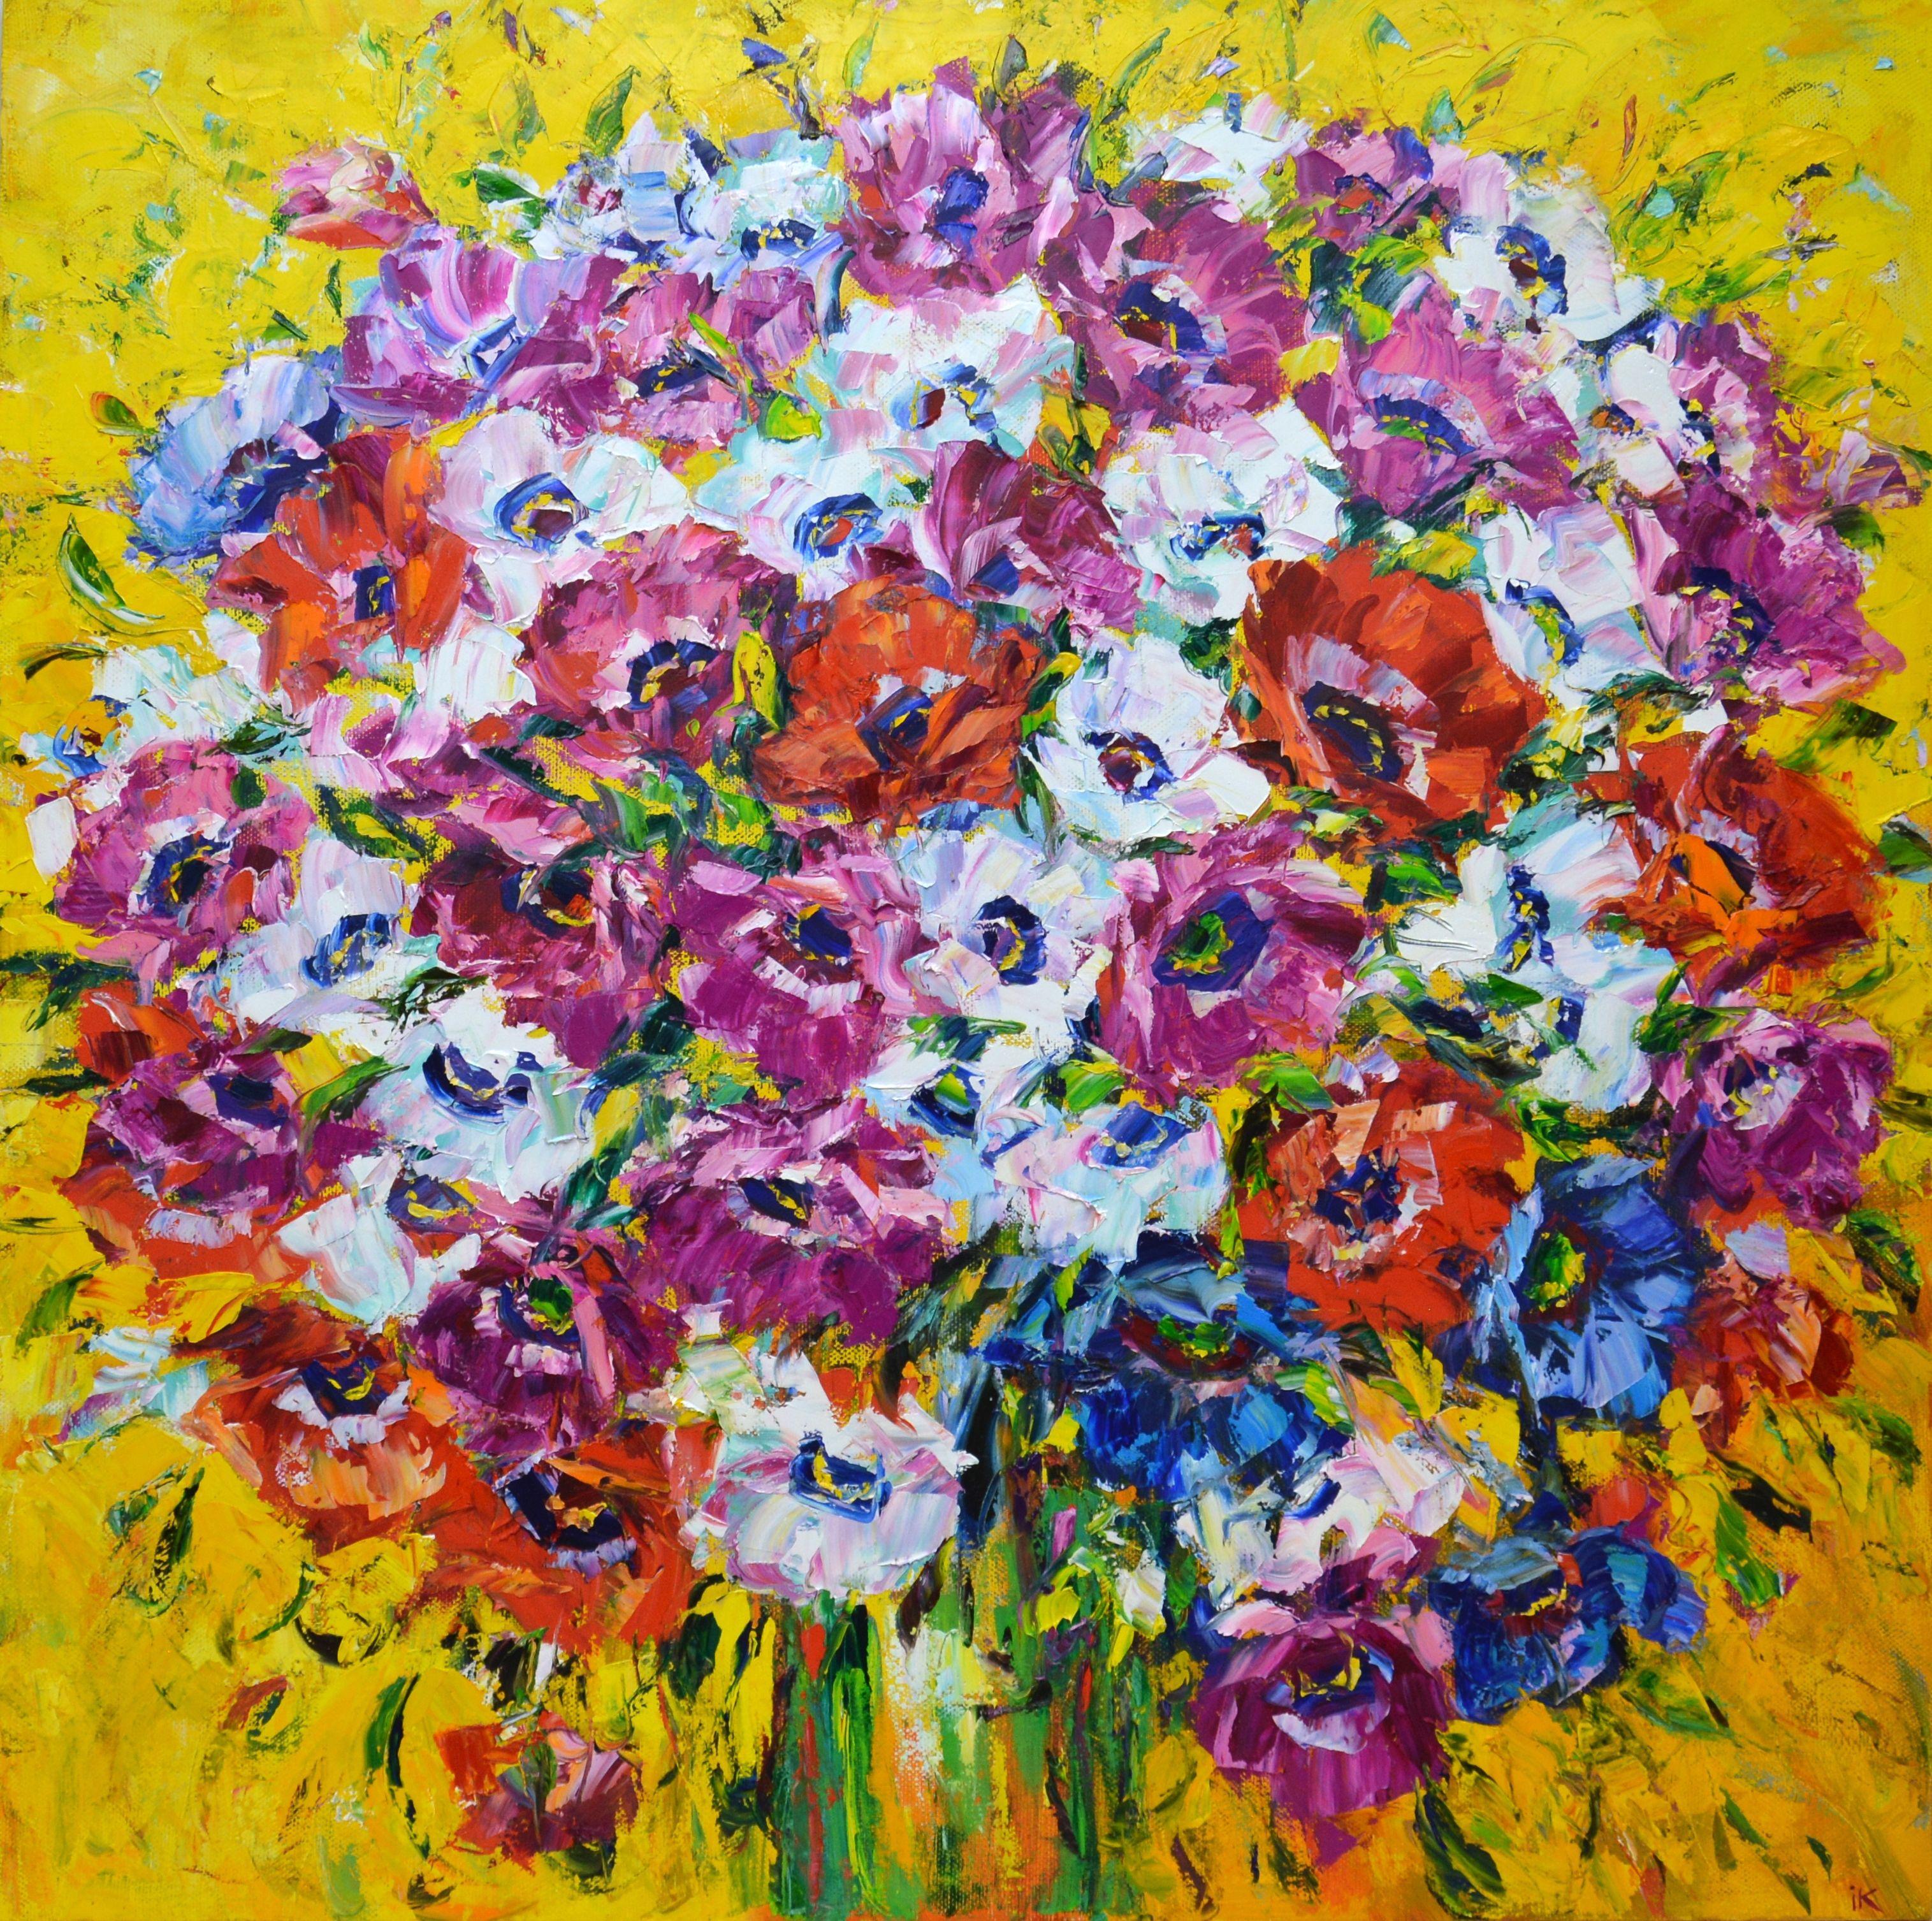 On an abstract yellow background, a summer bouquet of bright white, pink, red and blue anemones is presented. When the eye moves from the center of the image to the edges, the flowers turn into a colorful gamut of abstract strokes that create